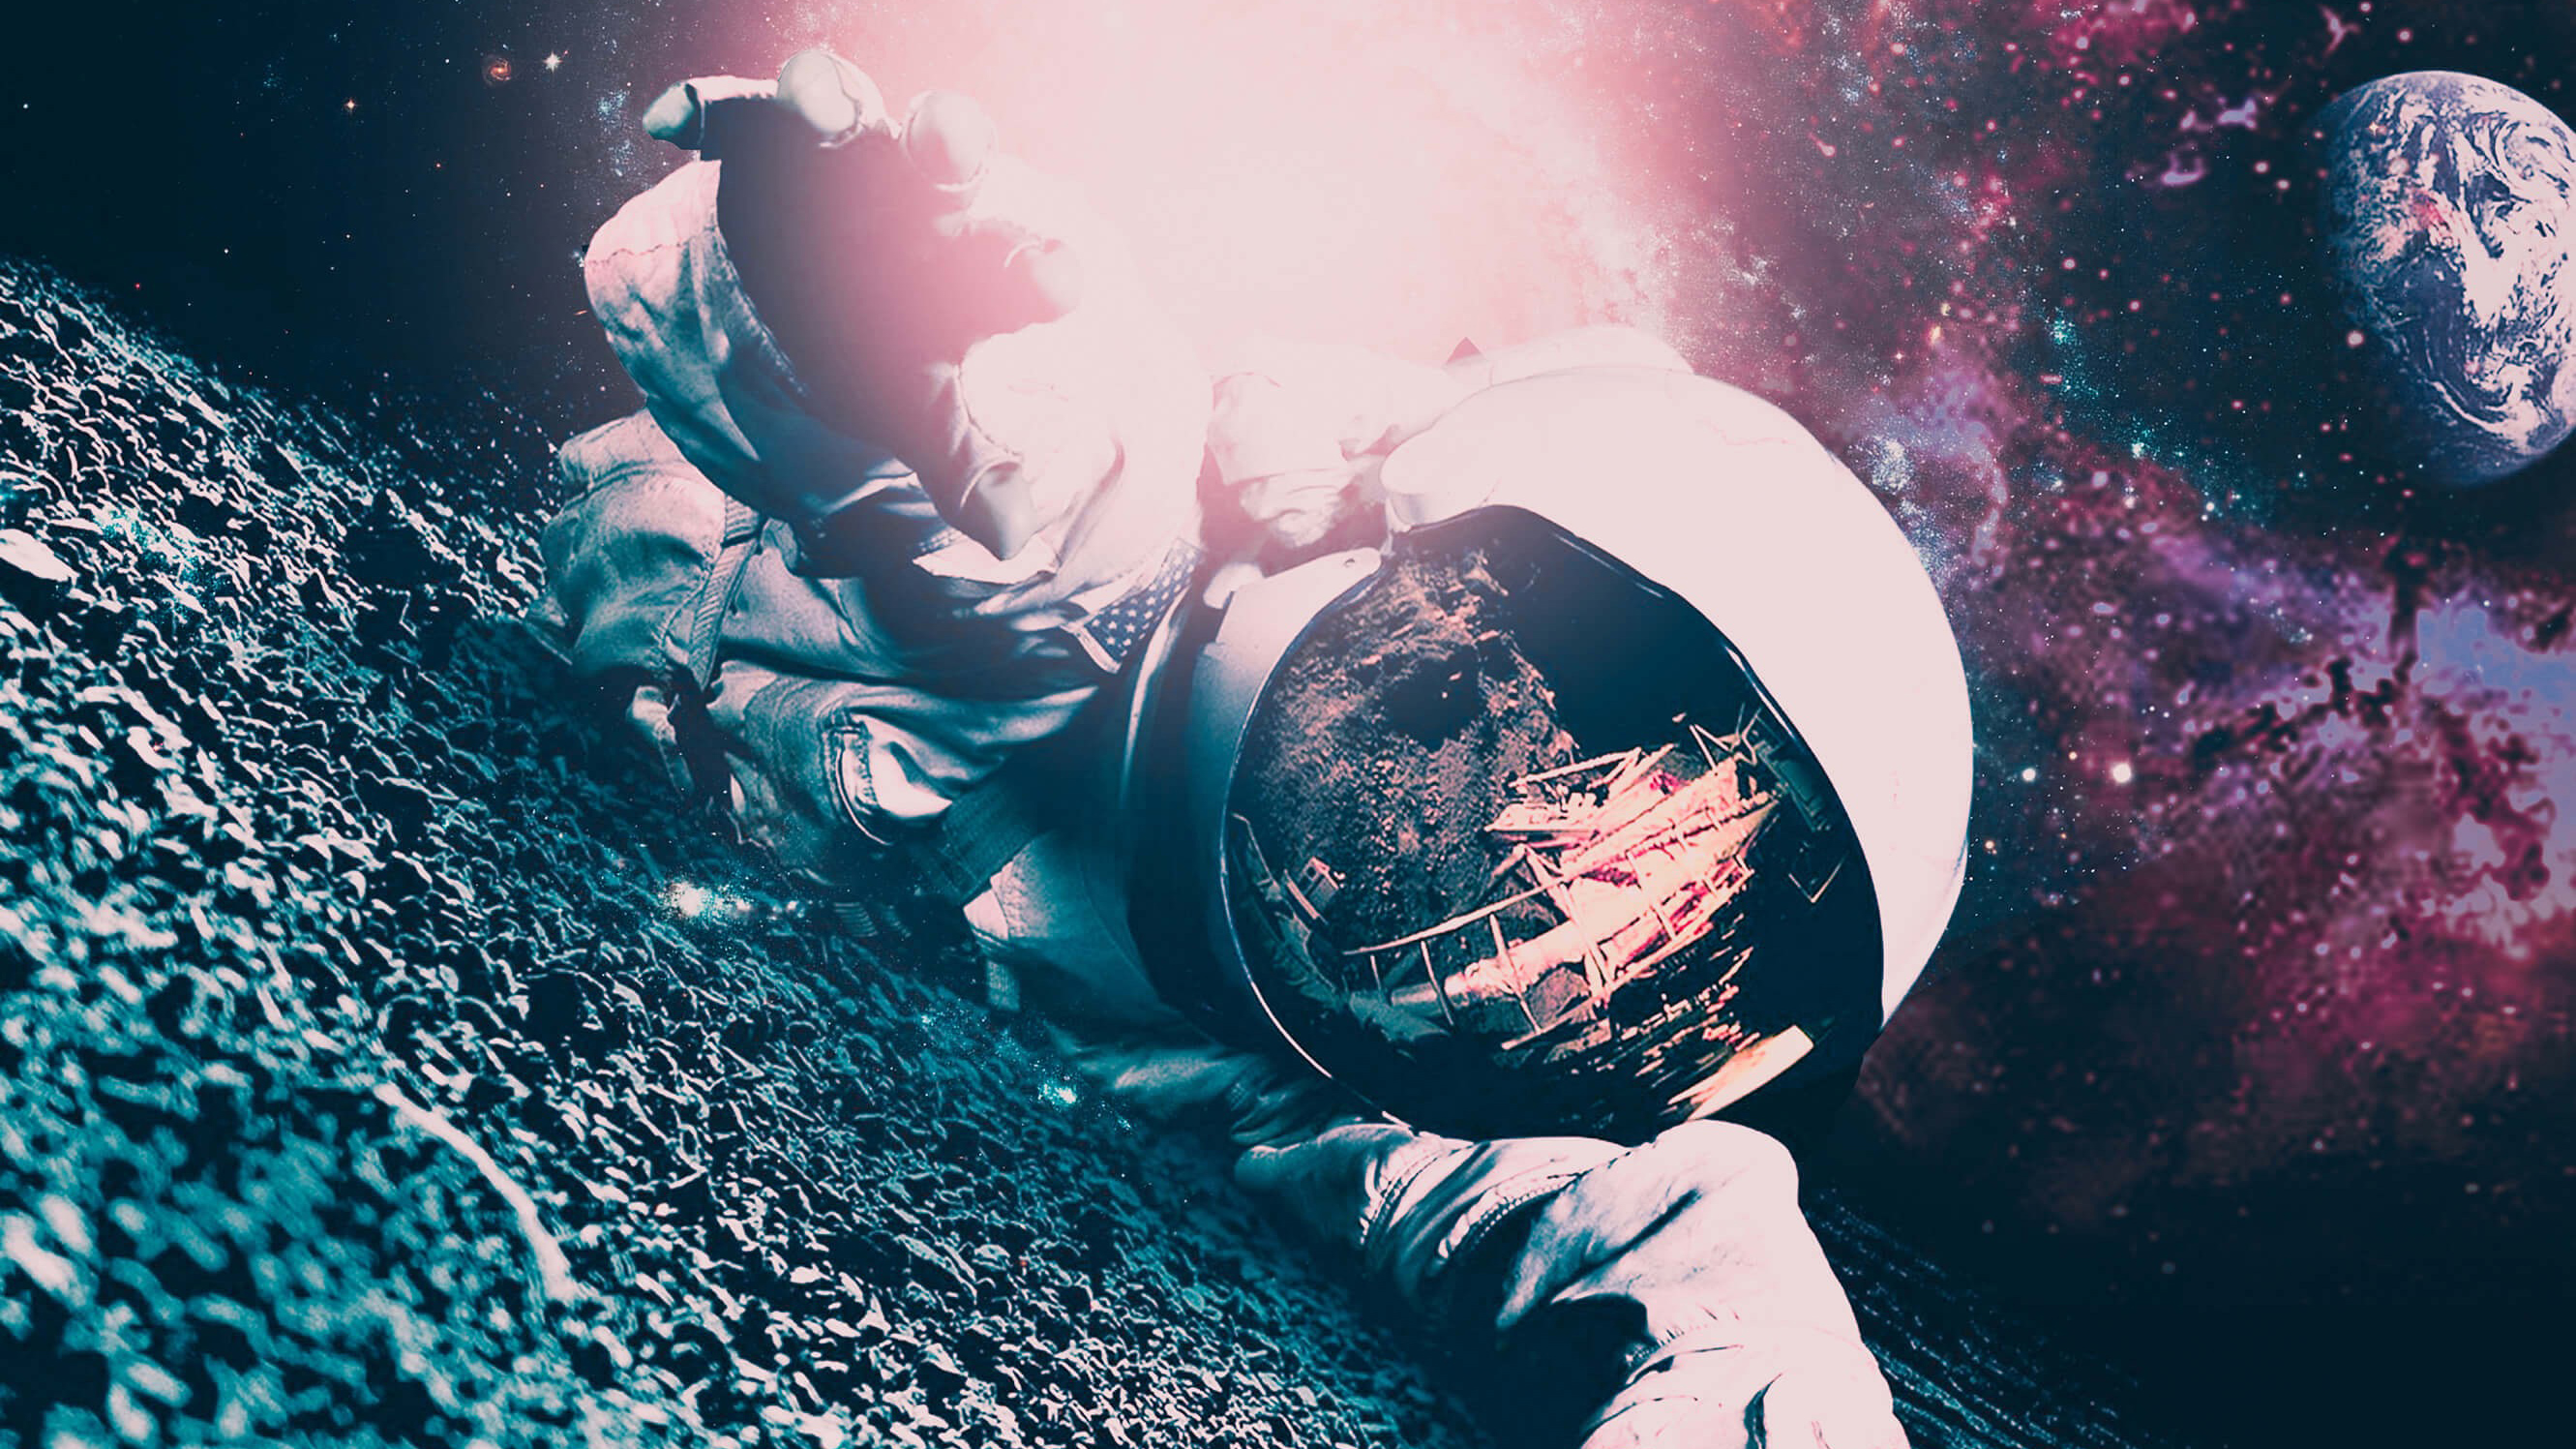 Astronaut Lost In Space Wallpapers